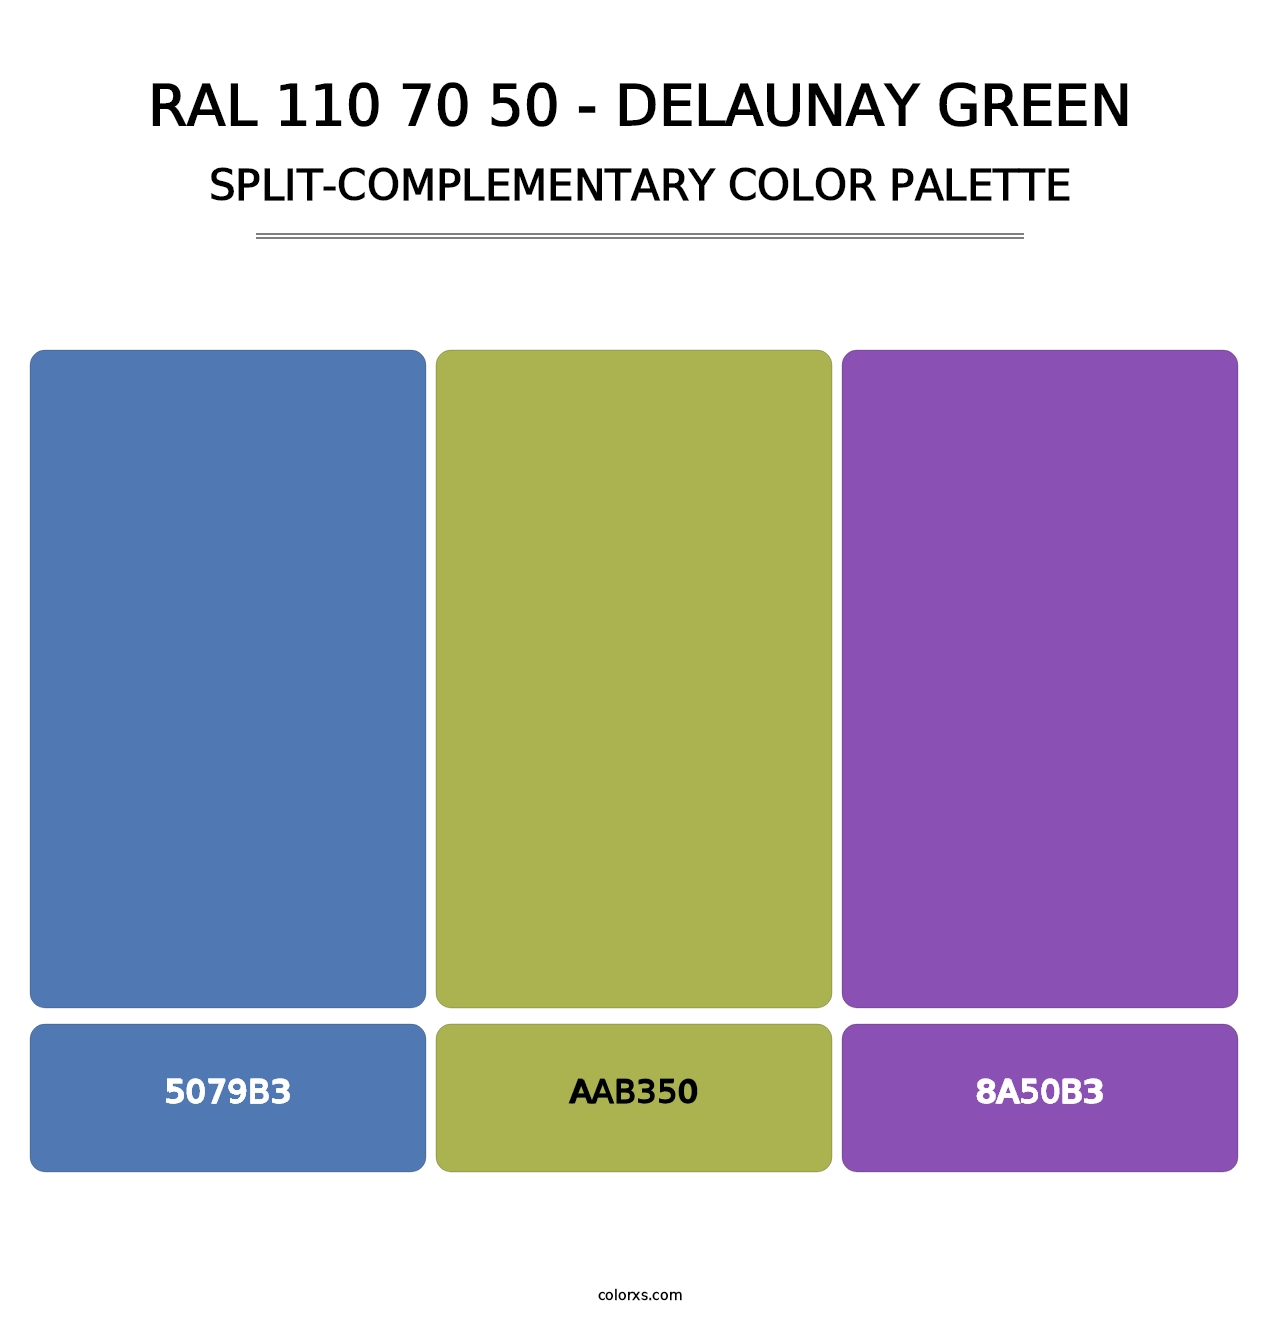 RAL 110 70 50 - Delaunay Green - Split-Complementary Color Palette